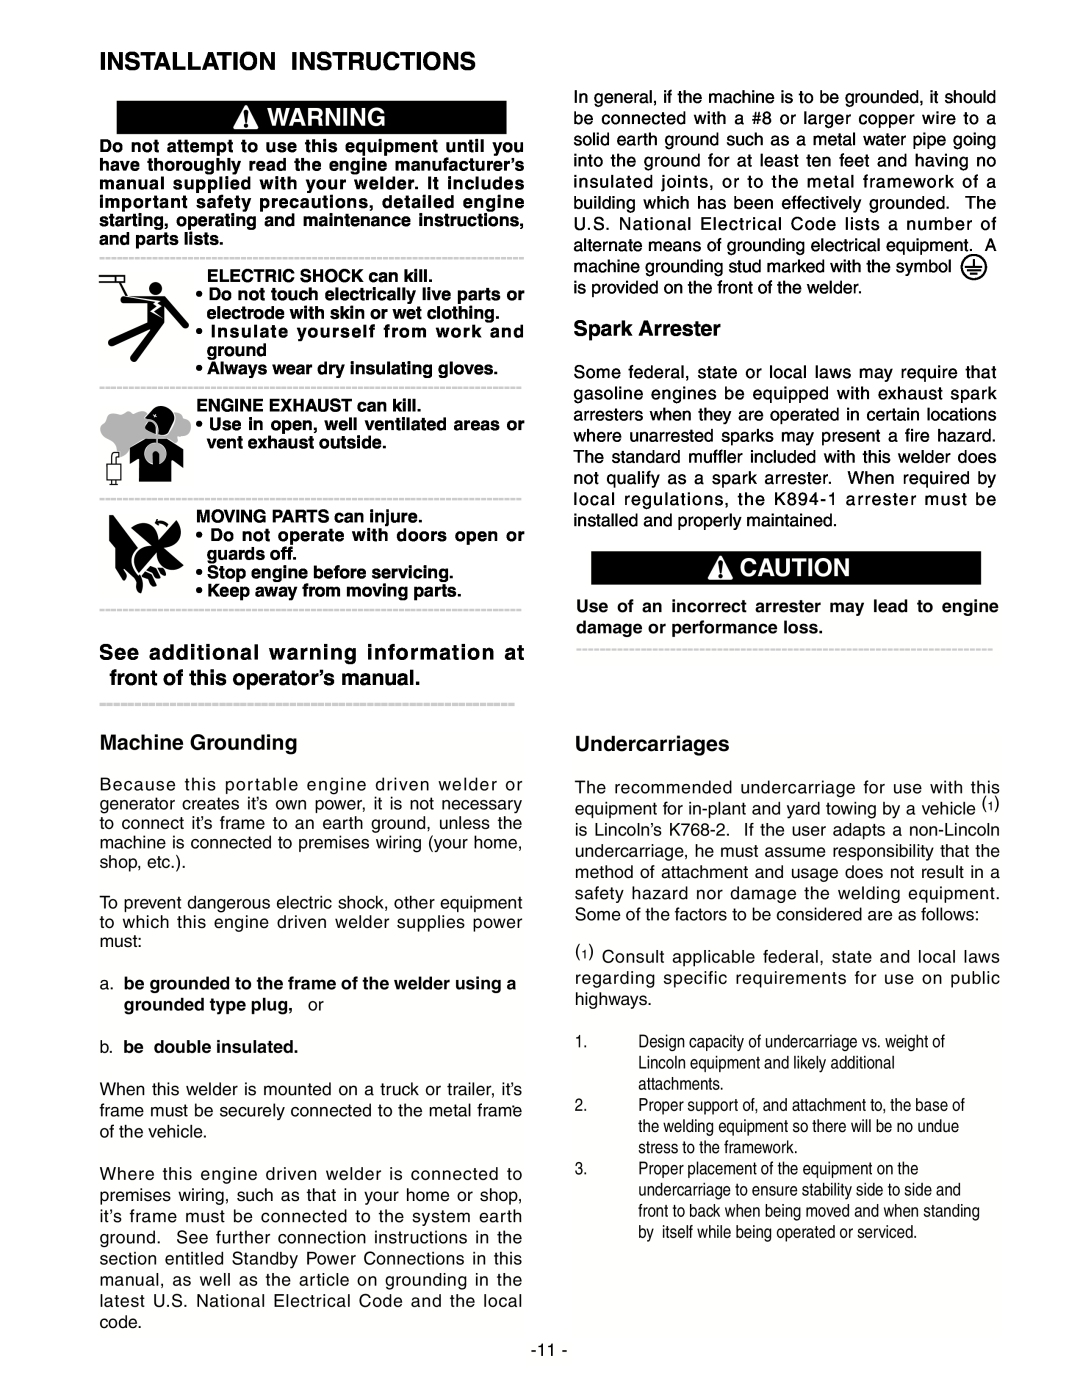 Lincoln Electric IM511-D Installation Instructions, See additional warning information at front of this operator’s manual 